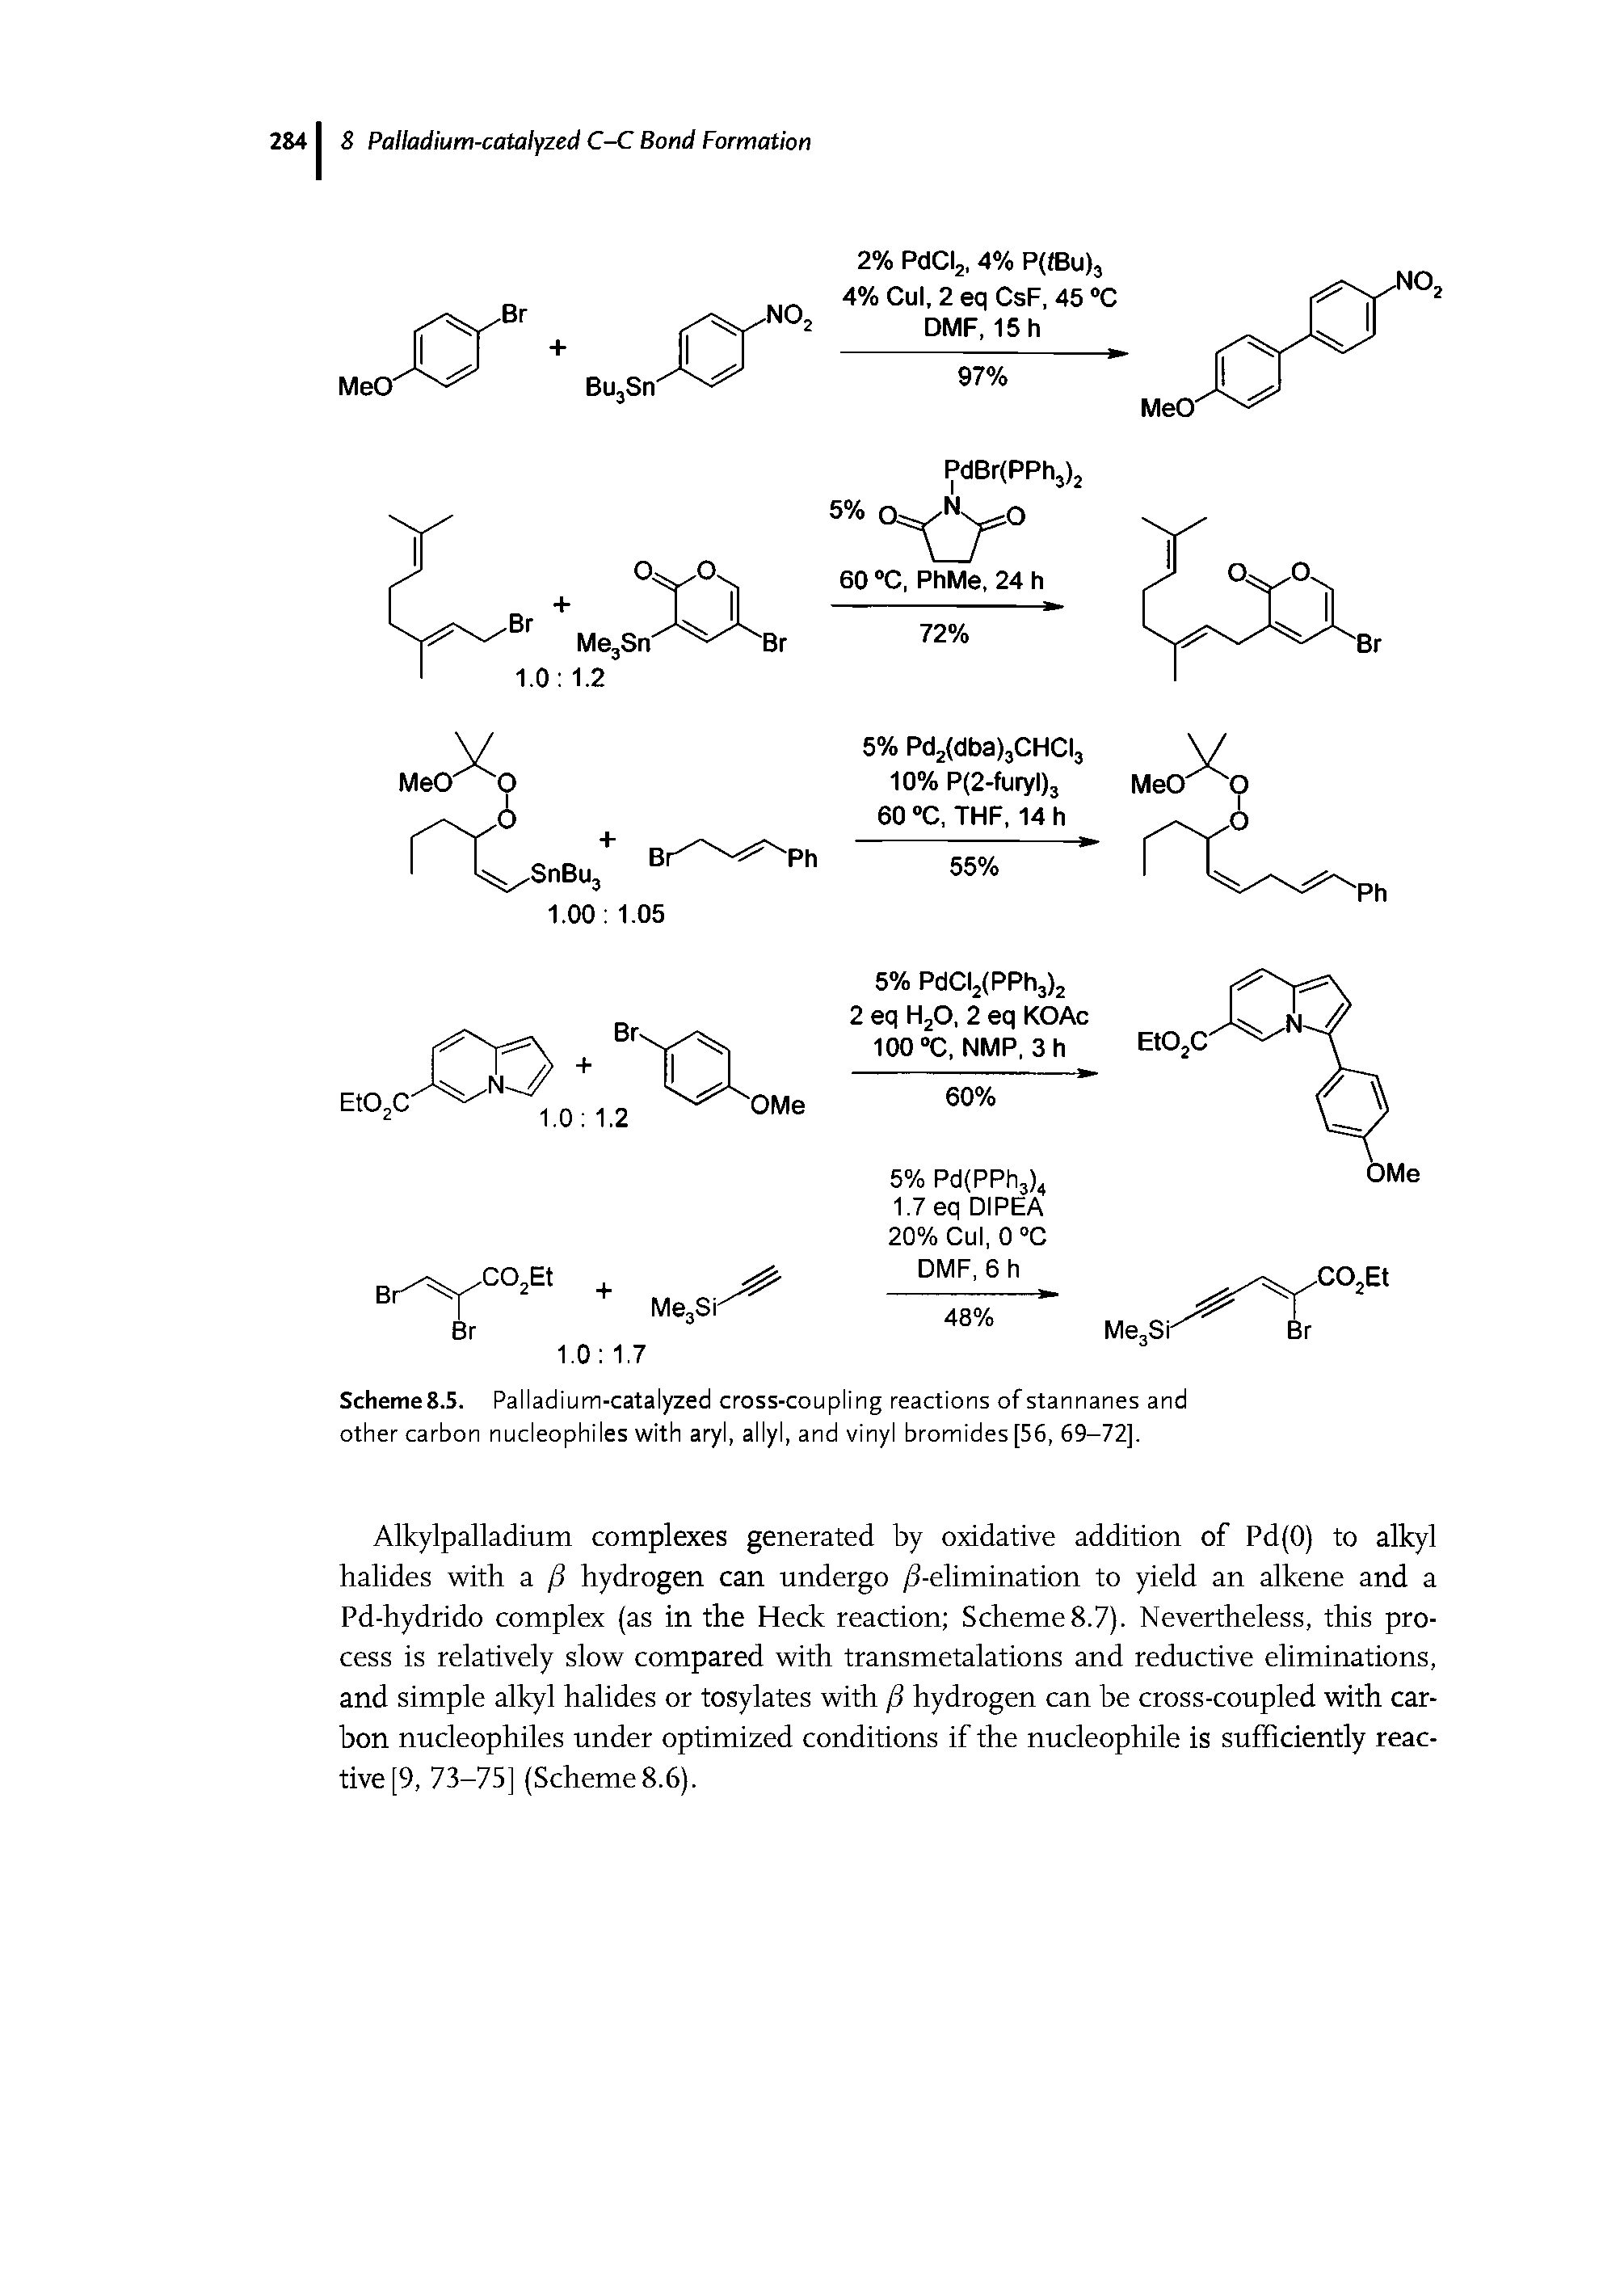 Scheme8.5. Palladium-catalyzed cross-coupling reactions of stannanes and other carbon nucleophiles with aryl, allyl, and vinyl bromides [56, 69-72],...